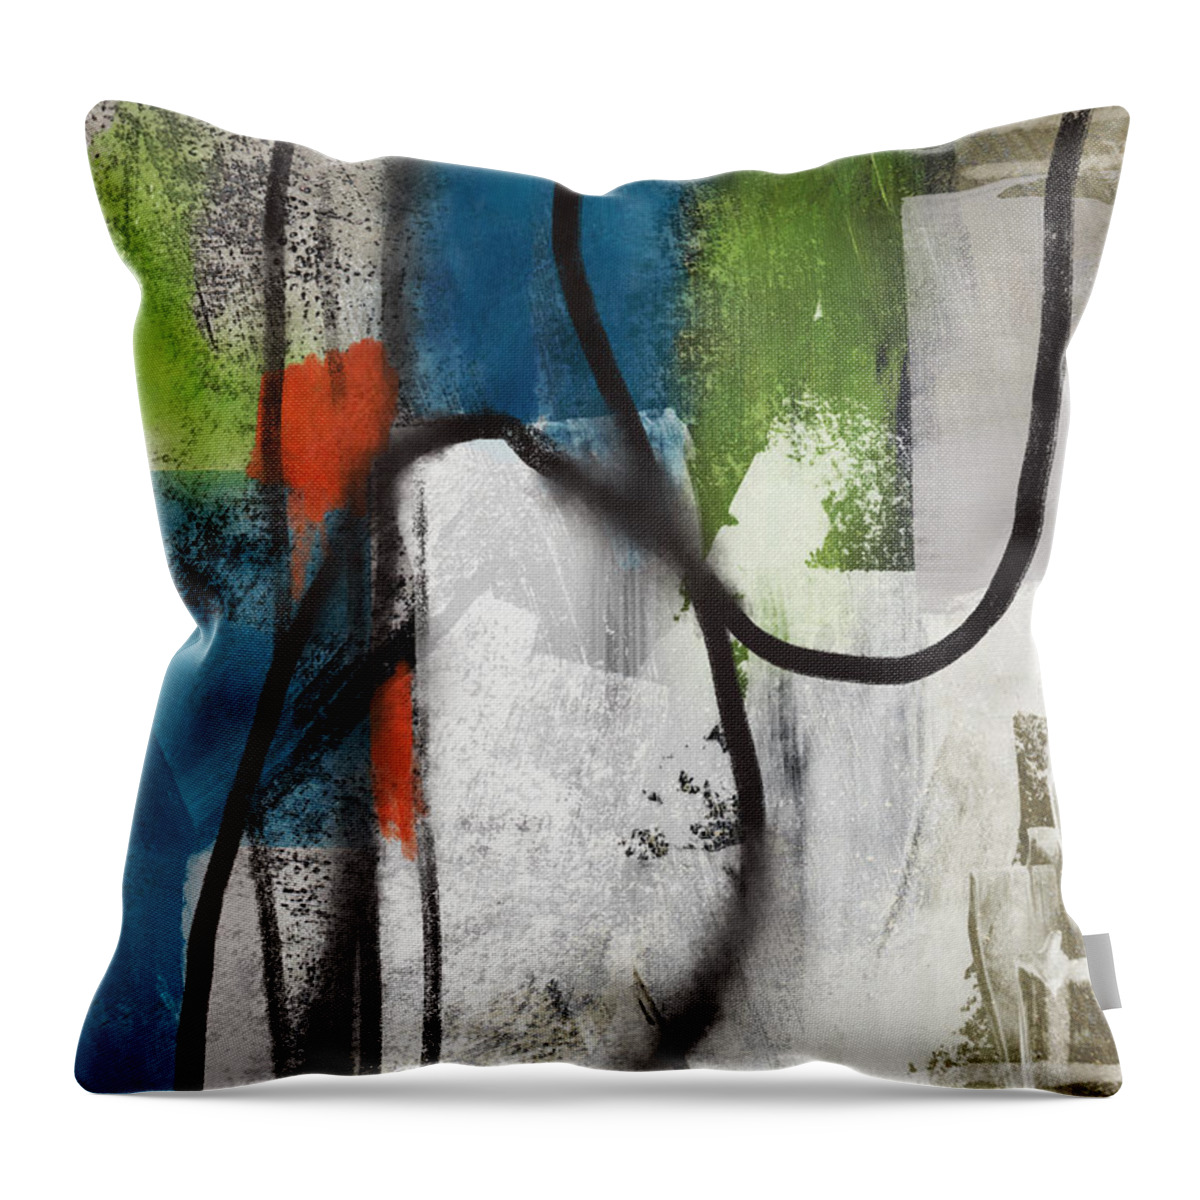 Abstract Throw Pillow featuring the mixed media Intersection 40- Art by Linda Woods by Linda Woods